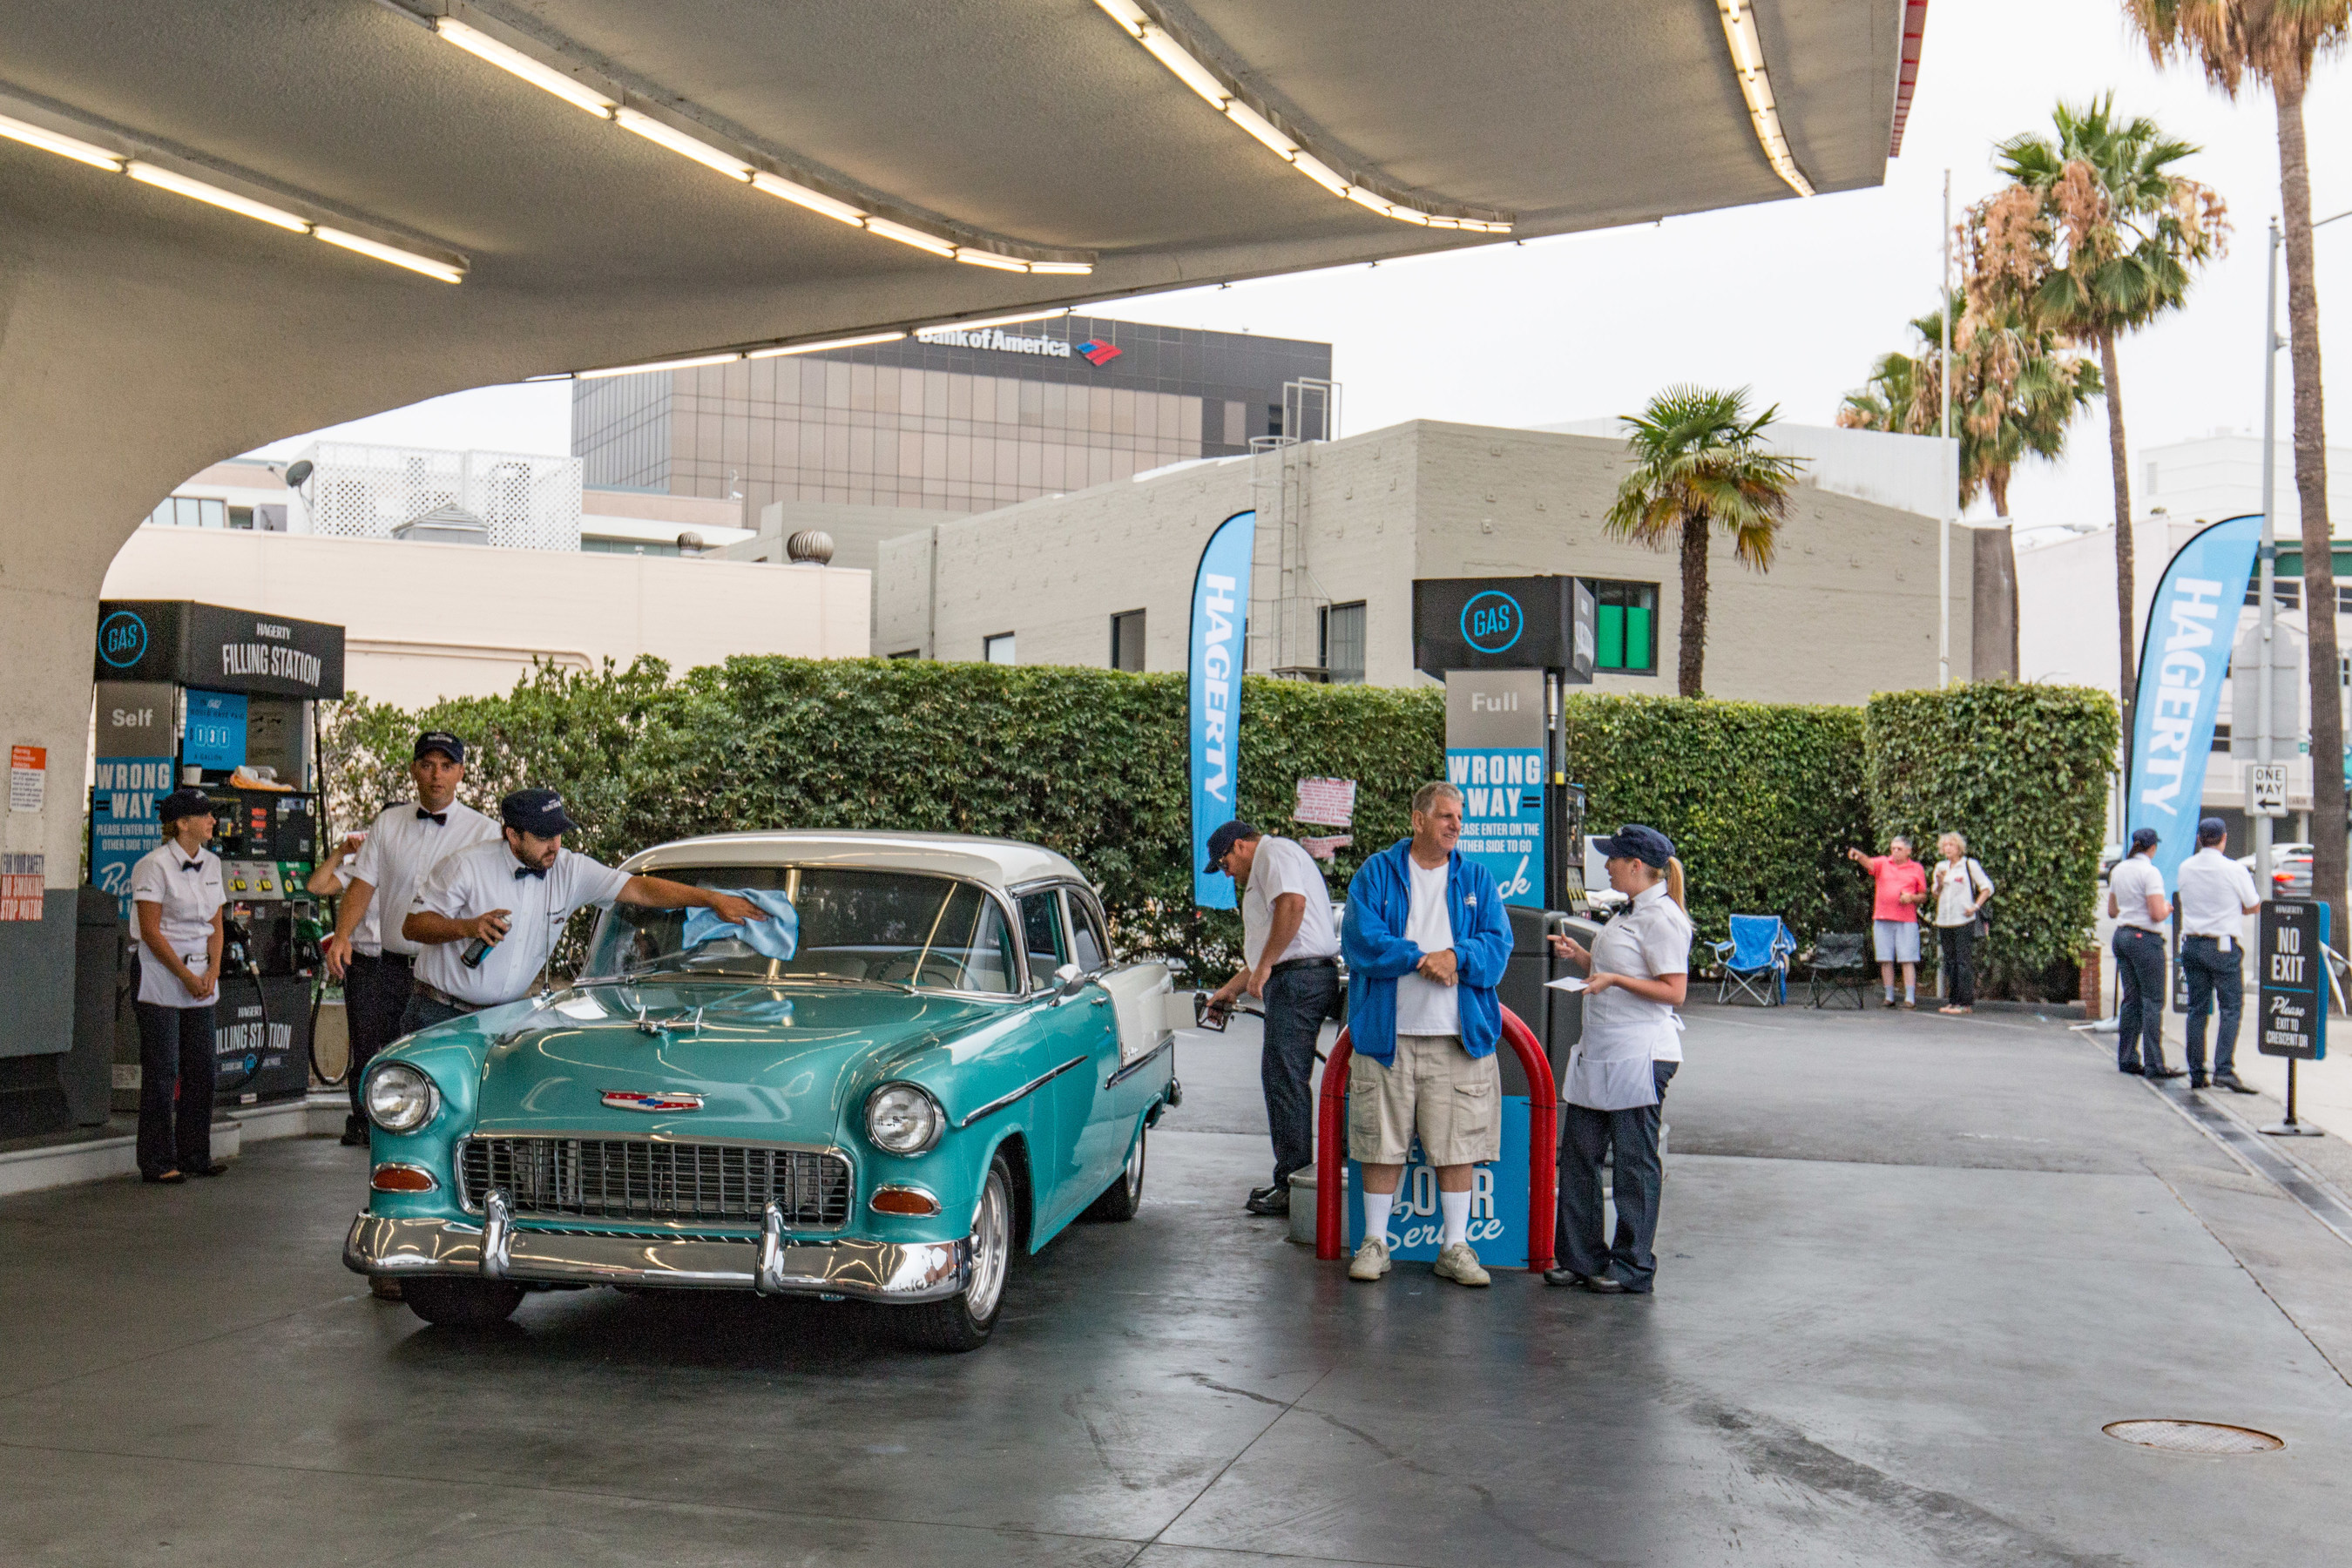 Owner Mike Novins and 1955 Chevrolet Bel Air from Northridge, CA purchased gas for 29 cents per gallon.